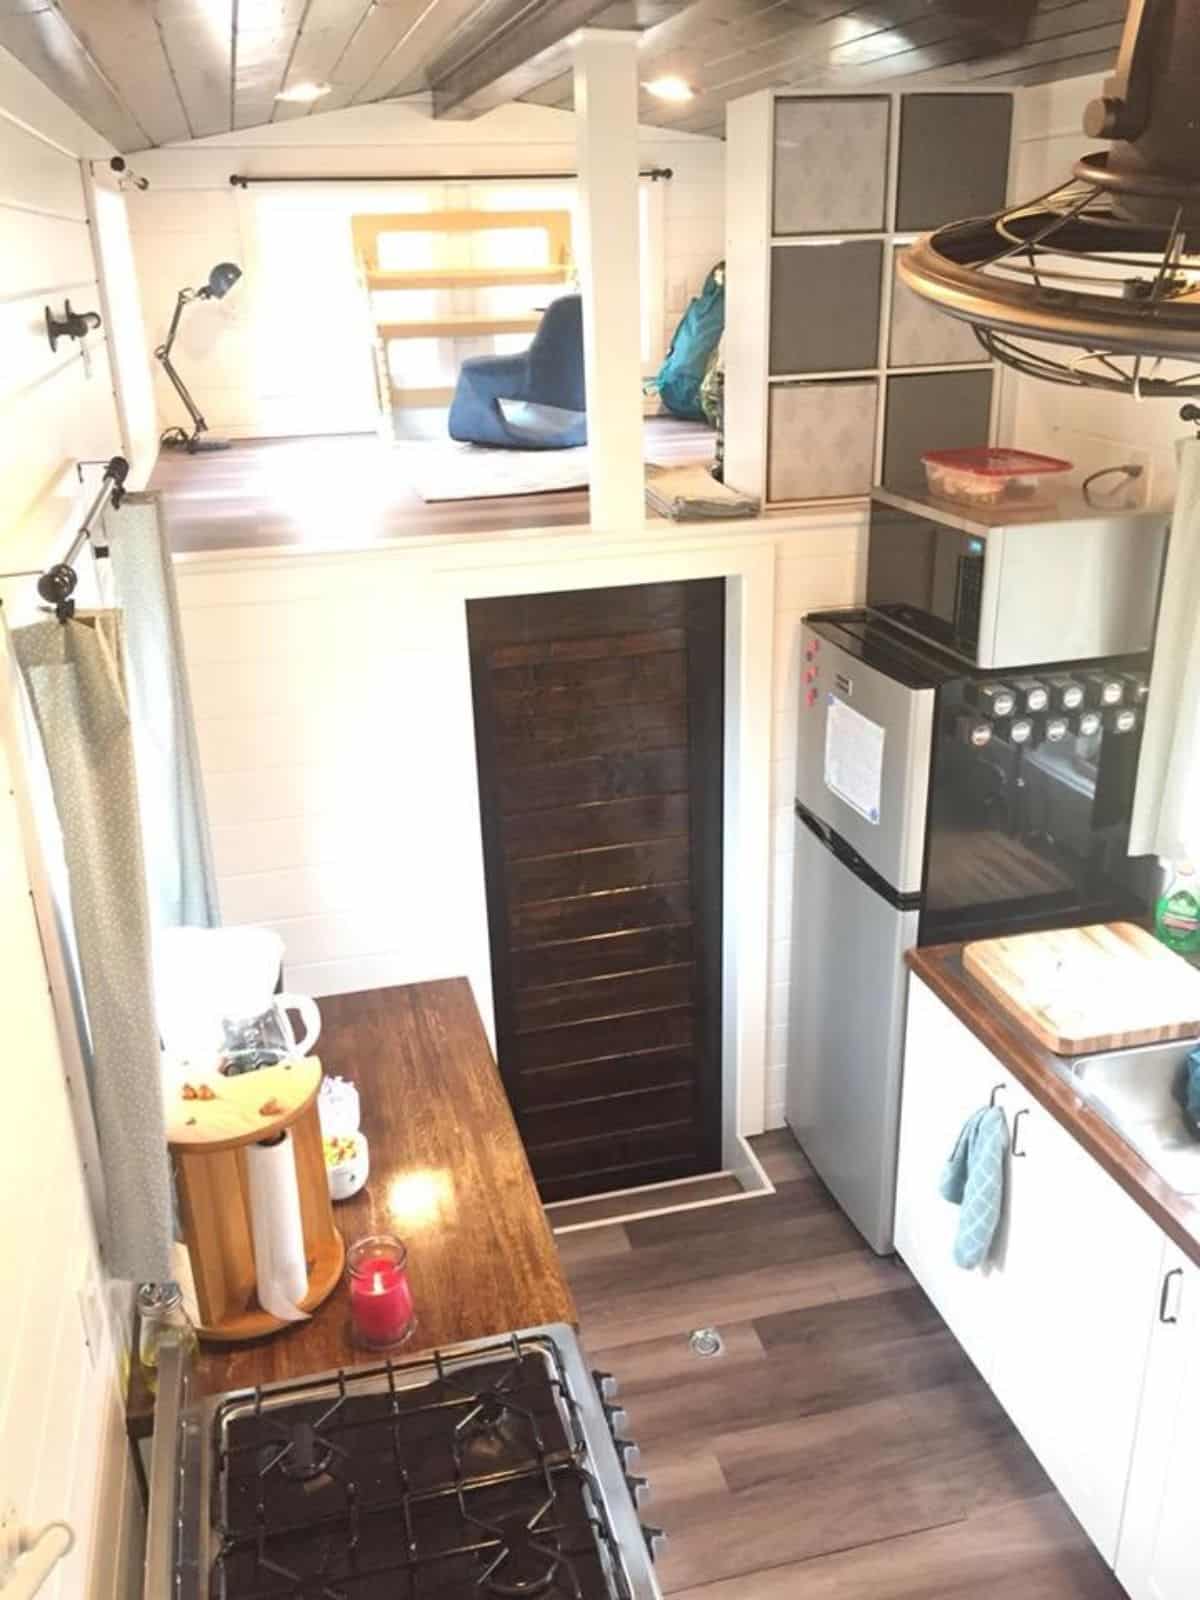 all the essential appliances present in the kitchen of Noah certified tiny house